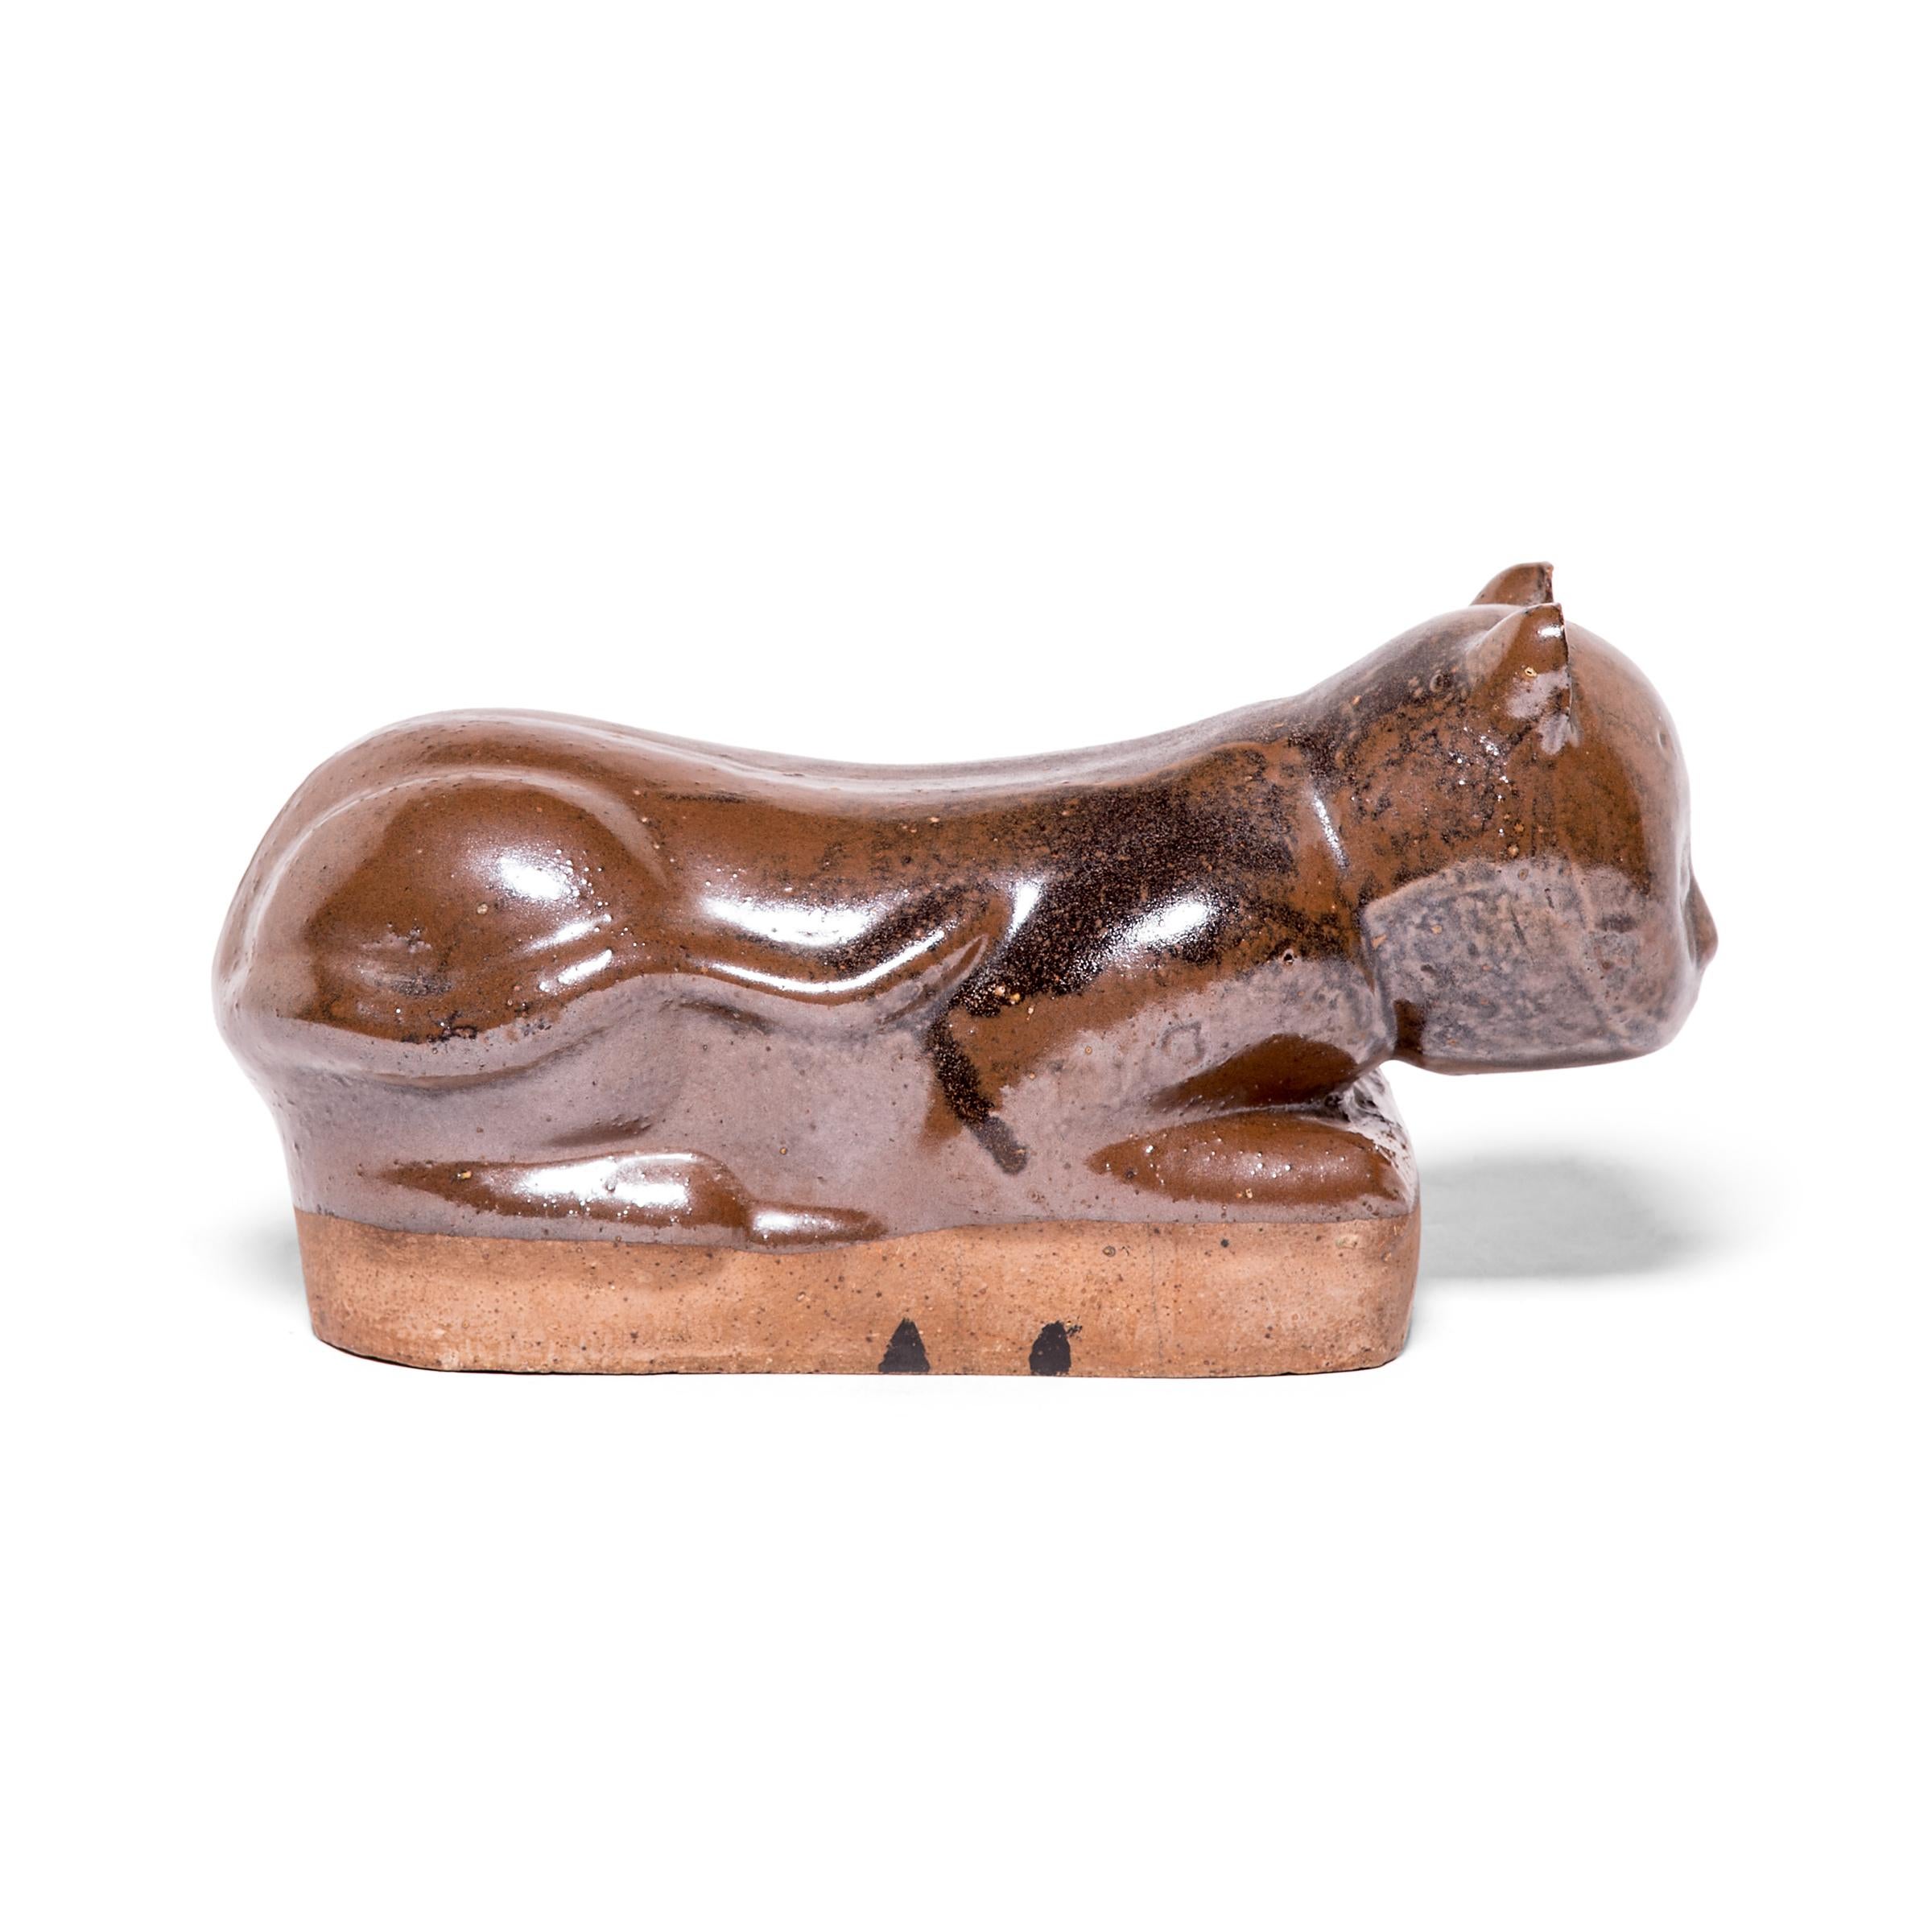 To keep her elaborate hairstyle intact while sleeping, a well-to-do Qing-dynasty woman once used this ceramic headrest as a pillow. The headrest is shaped as a crouching house cat, cloaked in a beautifully irregular warm brown glaze. Drawn upon its